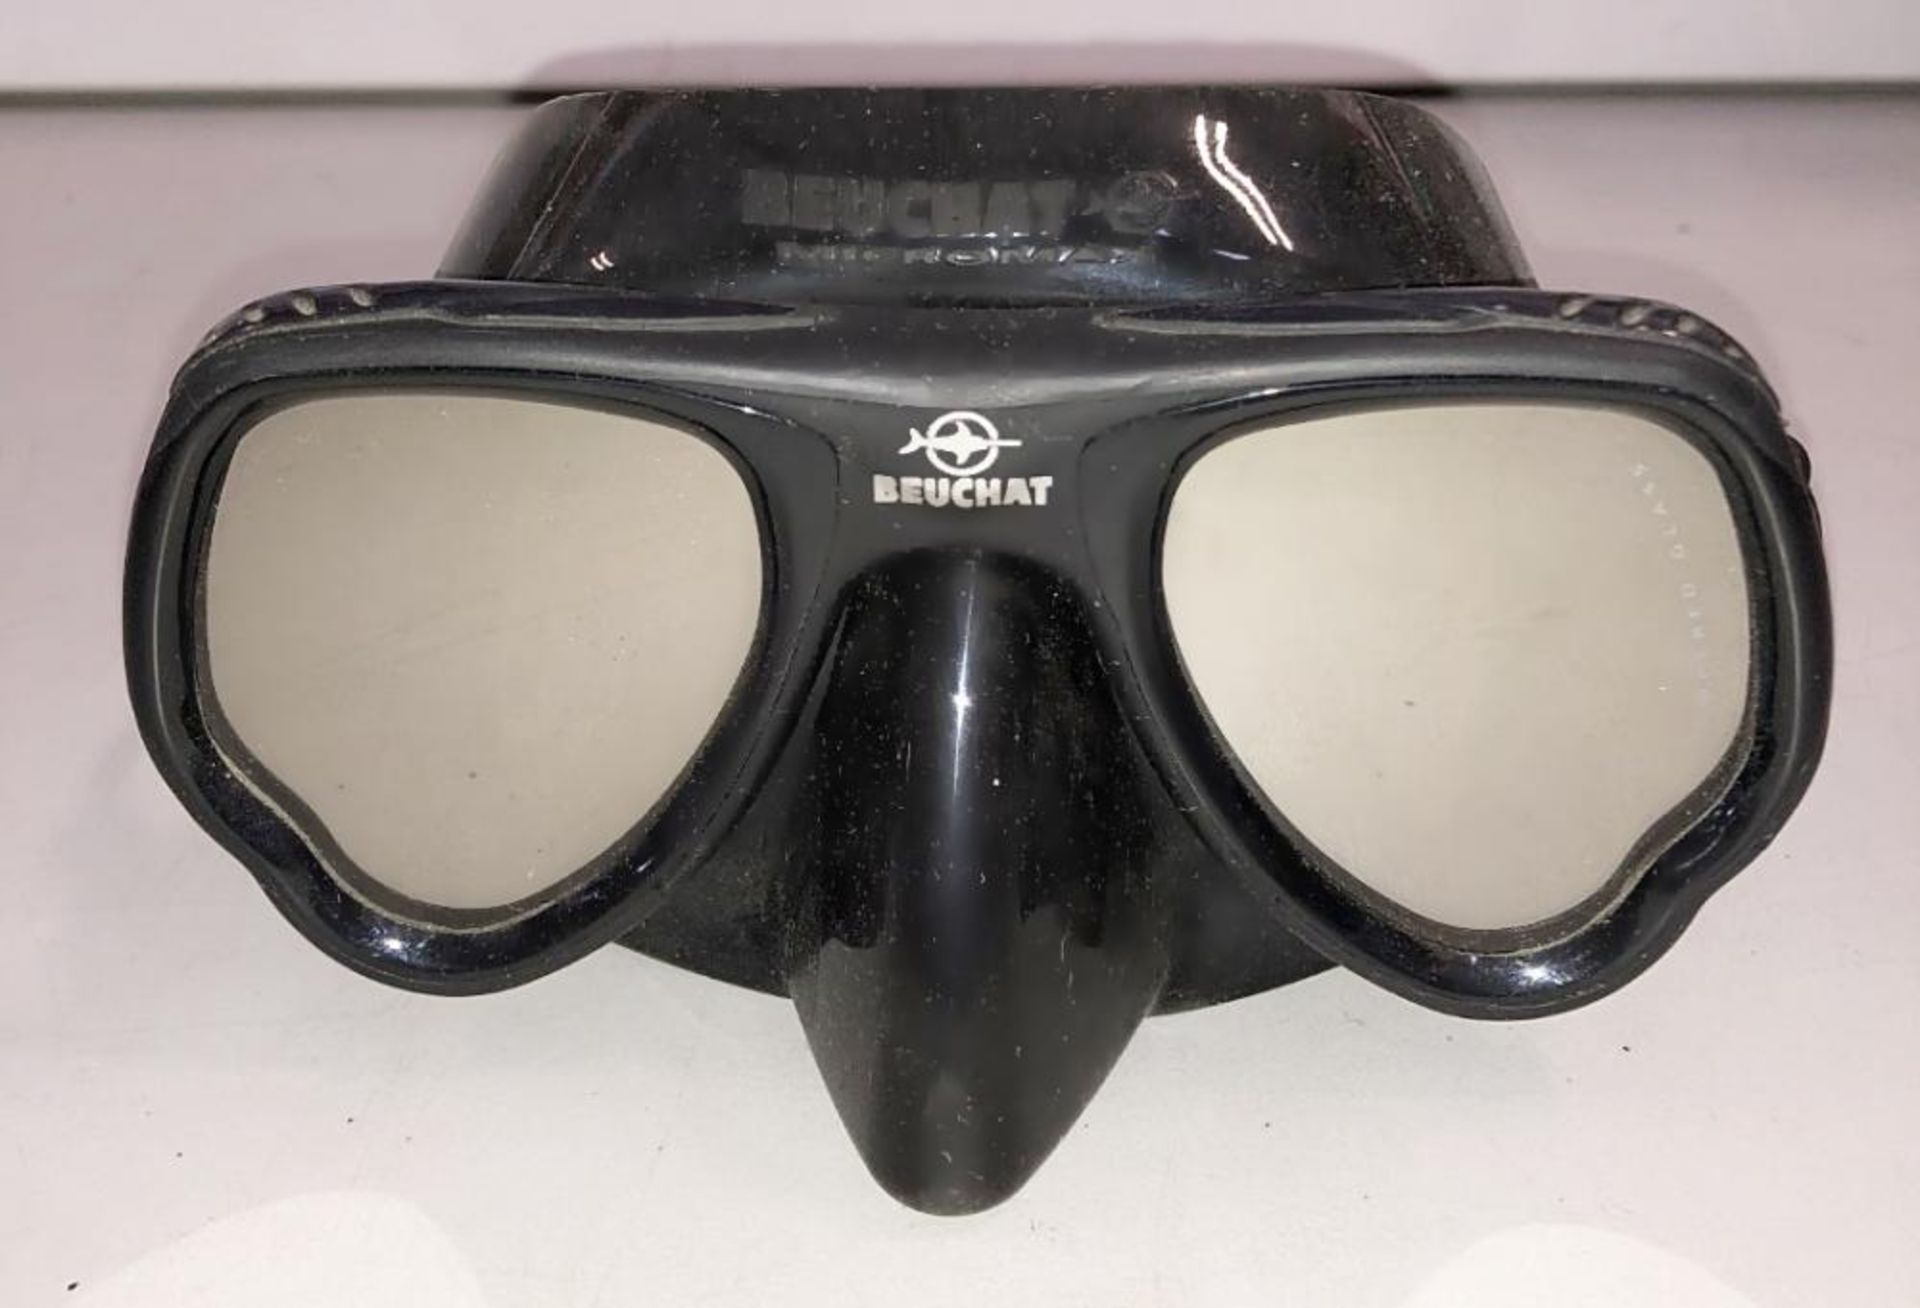 6 x New Branded Diving Masks - CL349 - Altrincham WA14 - Total RRP £187.44 - Image 10 of 20